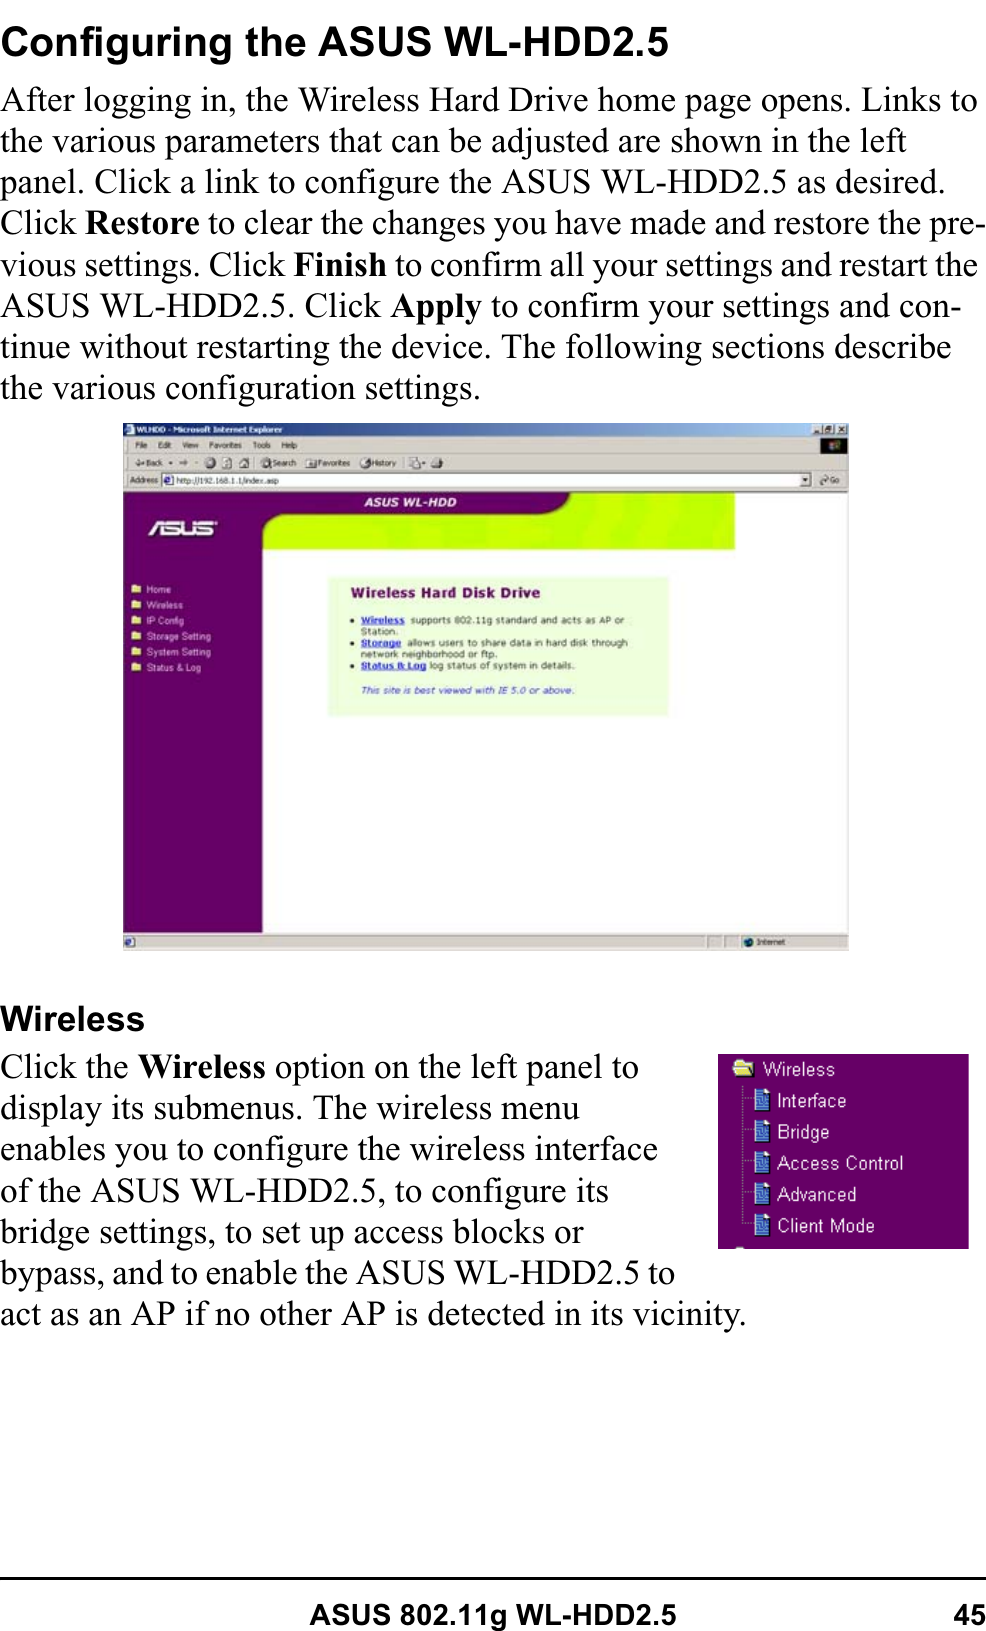 ASUS 802.11g WL-HDD2.5 45Configuring the ASUS WL-HDD2.5After logging in, the Wireless Hard Drive home page opens. Links to the various parameters that can be adjusted are shown in the left panel. Click a link to configure the ASUS WL-HDD2.5 as desired. Click Restore to clear the changes you have made and restore the pre-vious settings. Click Finish to confirm all your settings and restart the ASUS WL-HDD2.5. Click Apply to confirm your settings and con-tinue without restarting the device. The following sections describe the various configuration settings.WirelessClick the Wireless option on the left panel to display its submenus. The wireless menu enables you to configure the wireless interface of the ASUS WL-HDD2.5, to configure its bridge settings, to set up access blocks or bypass, and to enable the ASUS WL-HDD2.5 to act as an AP if no other AP is detected in its vicinity.